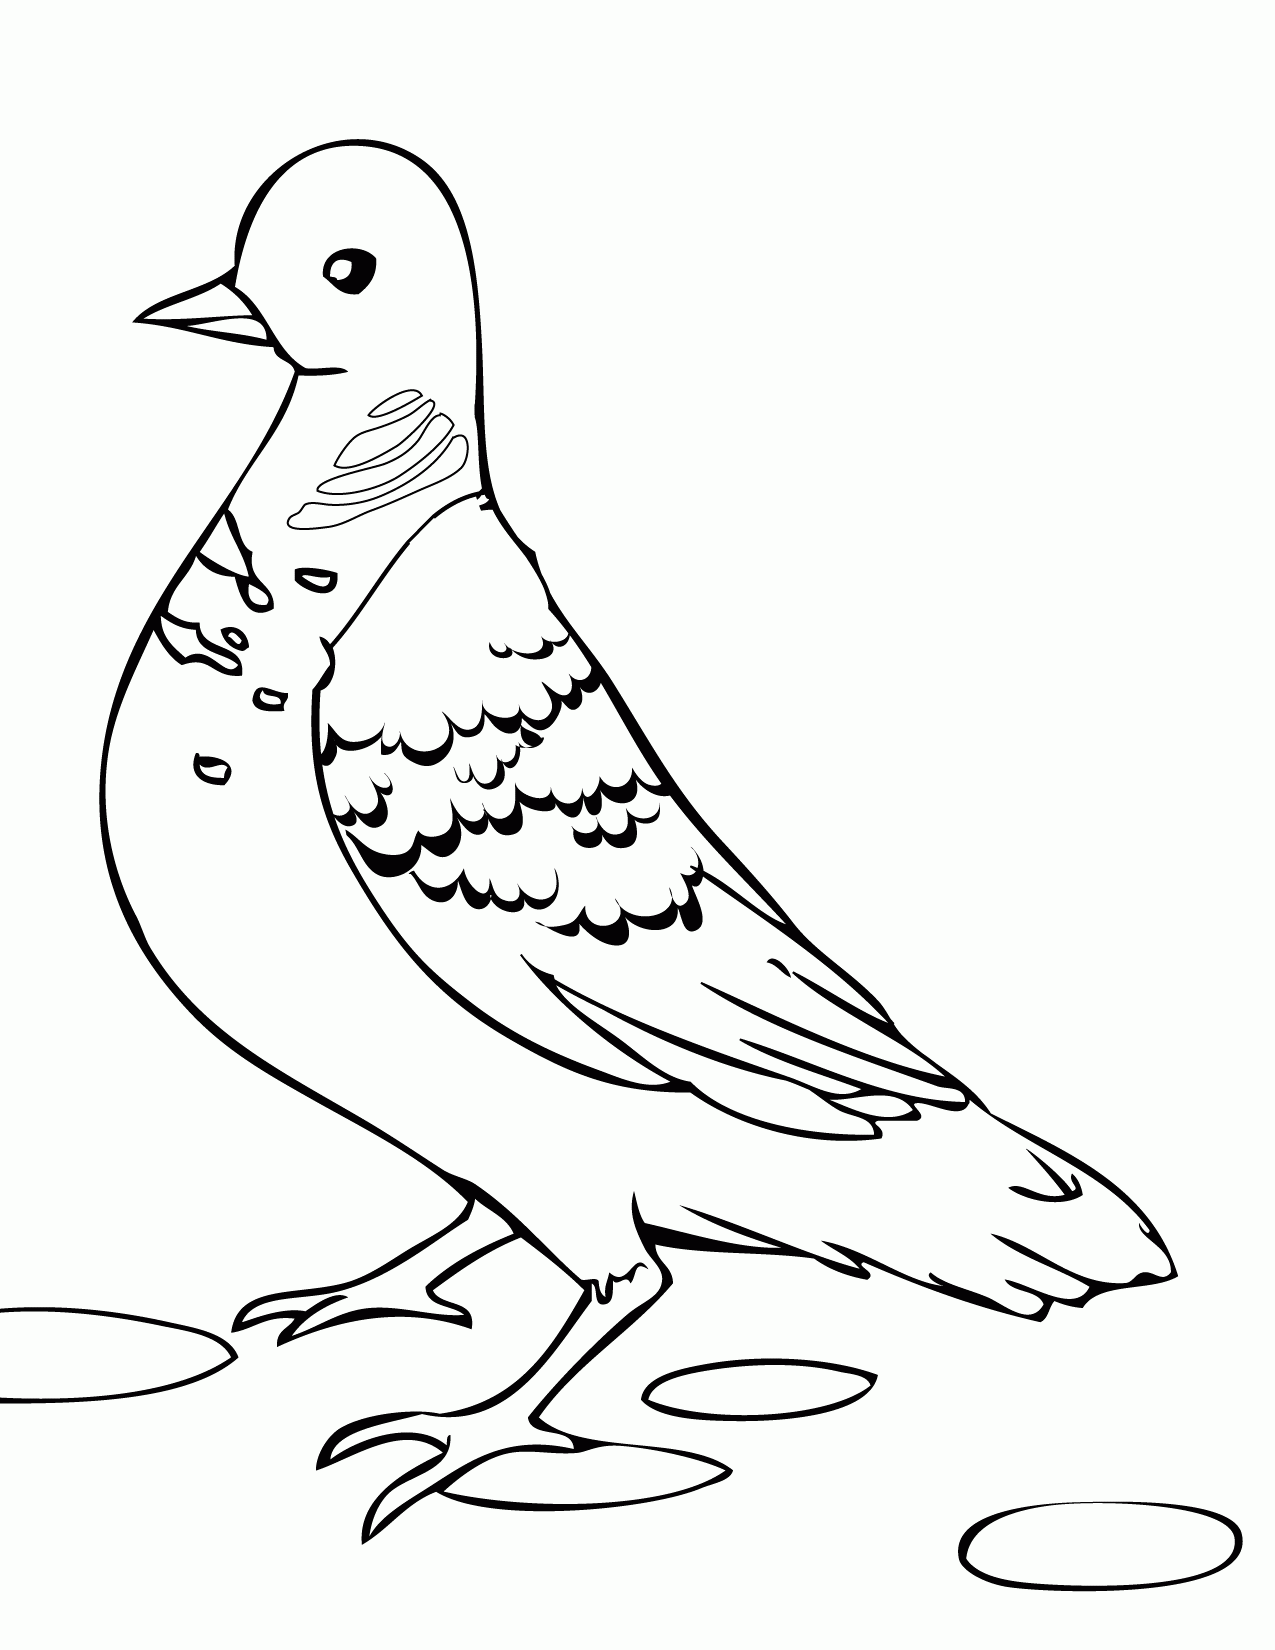 Free Dove Coloring Page - Coloring Home